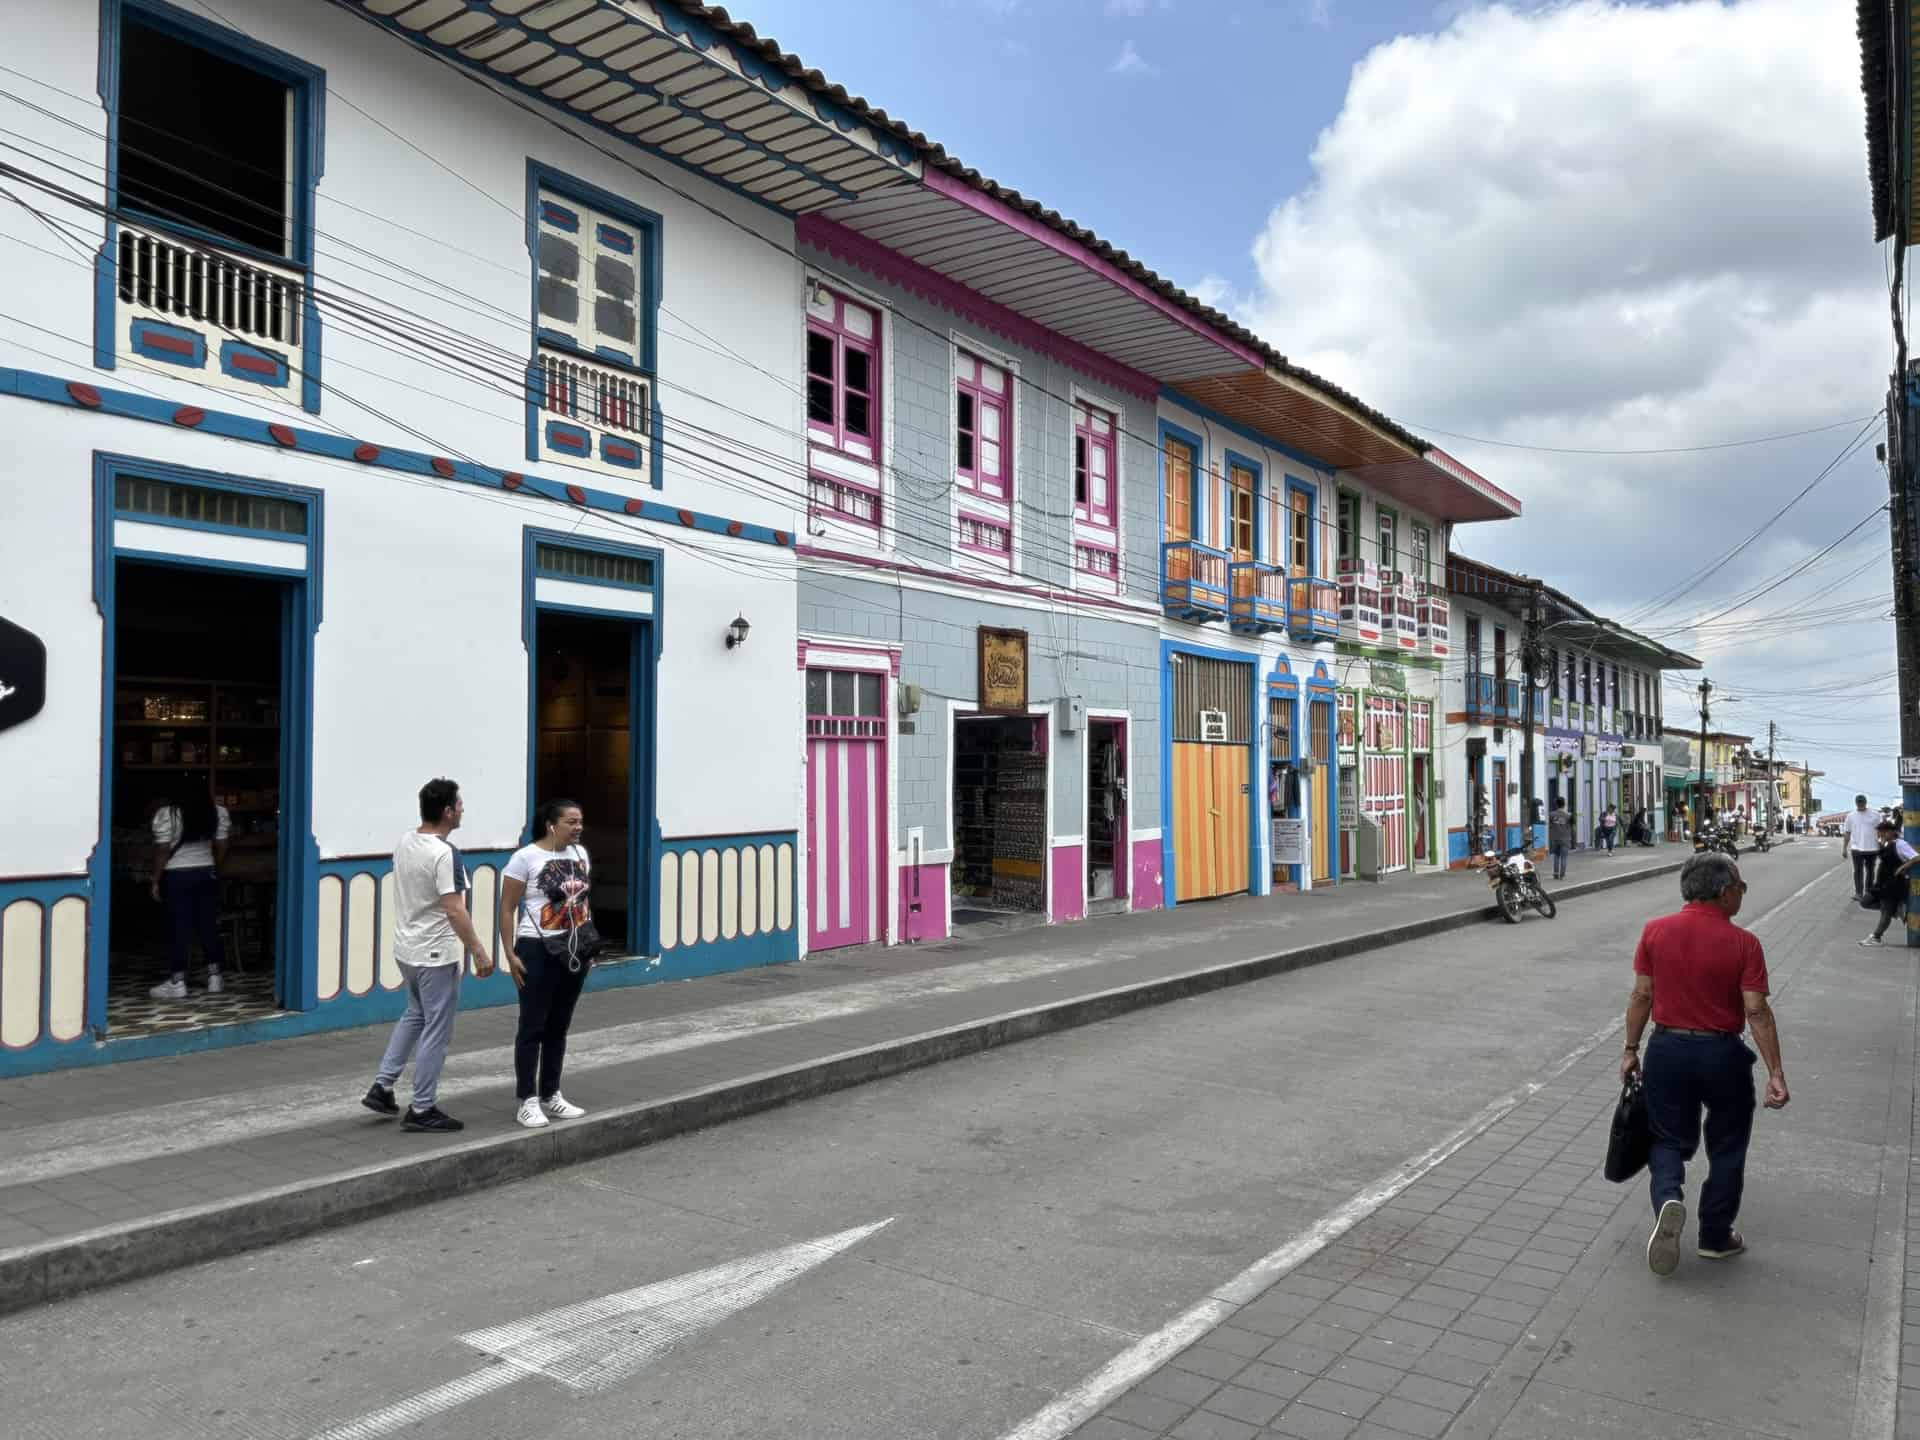 The Street Stopped in Time in Filandia, Quindío, Colombia